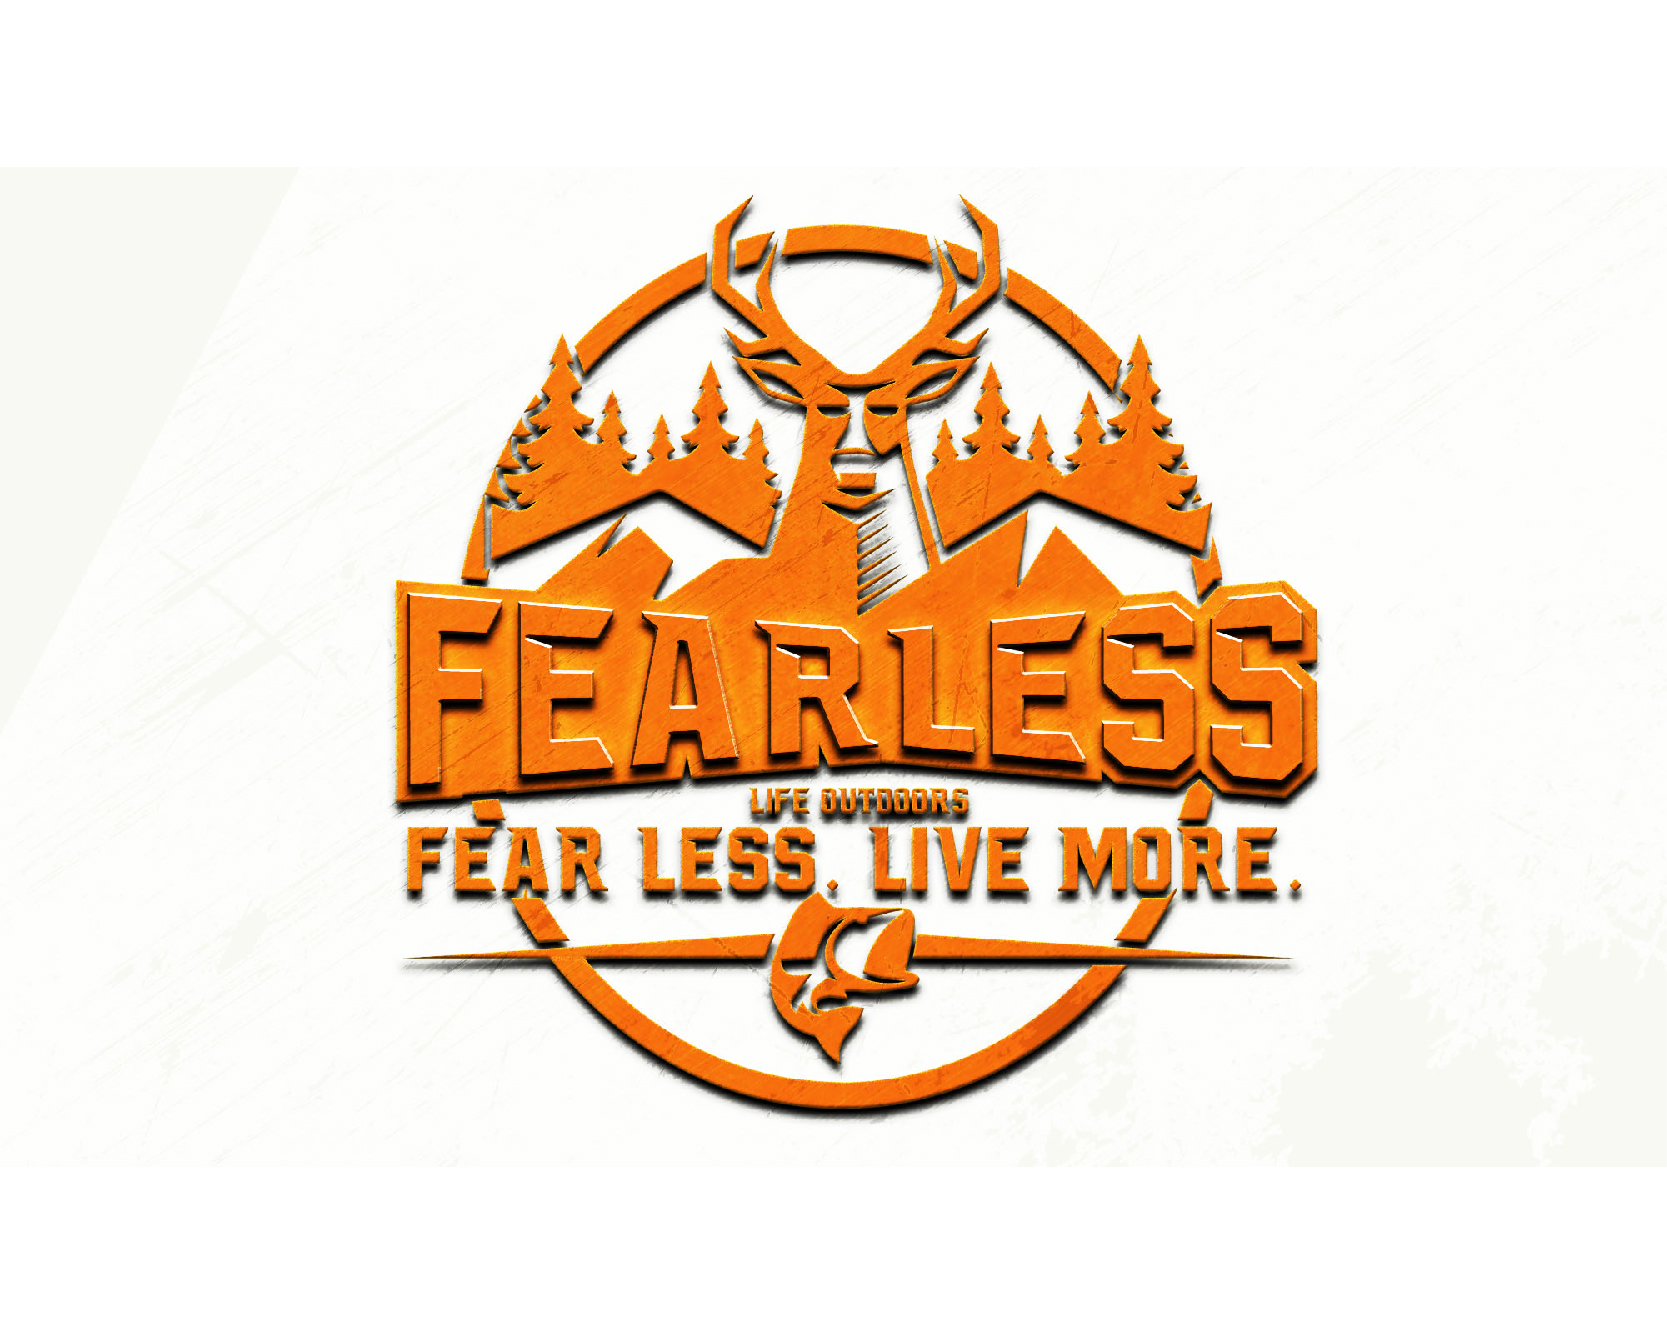 Logo Design Contest for Fearless Life Outdoors